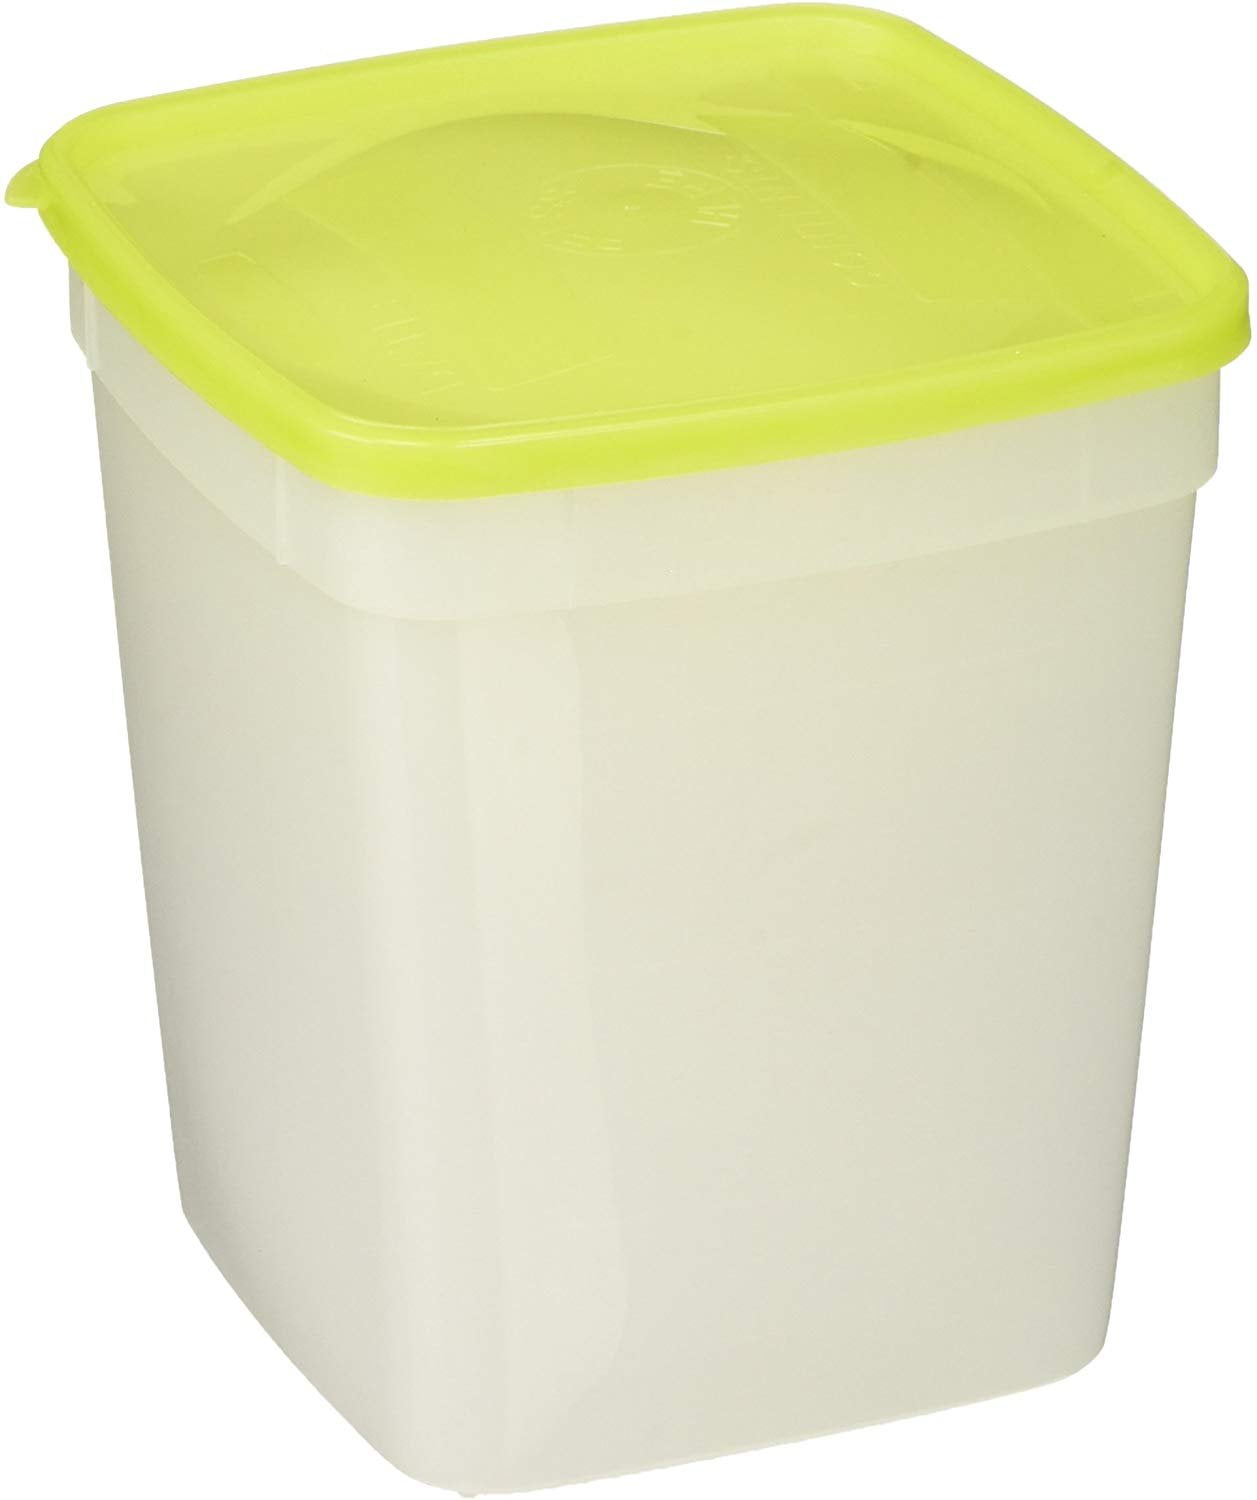 Arrow Home Products 00044 1-Quart Freezer Containers 3-Pack